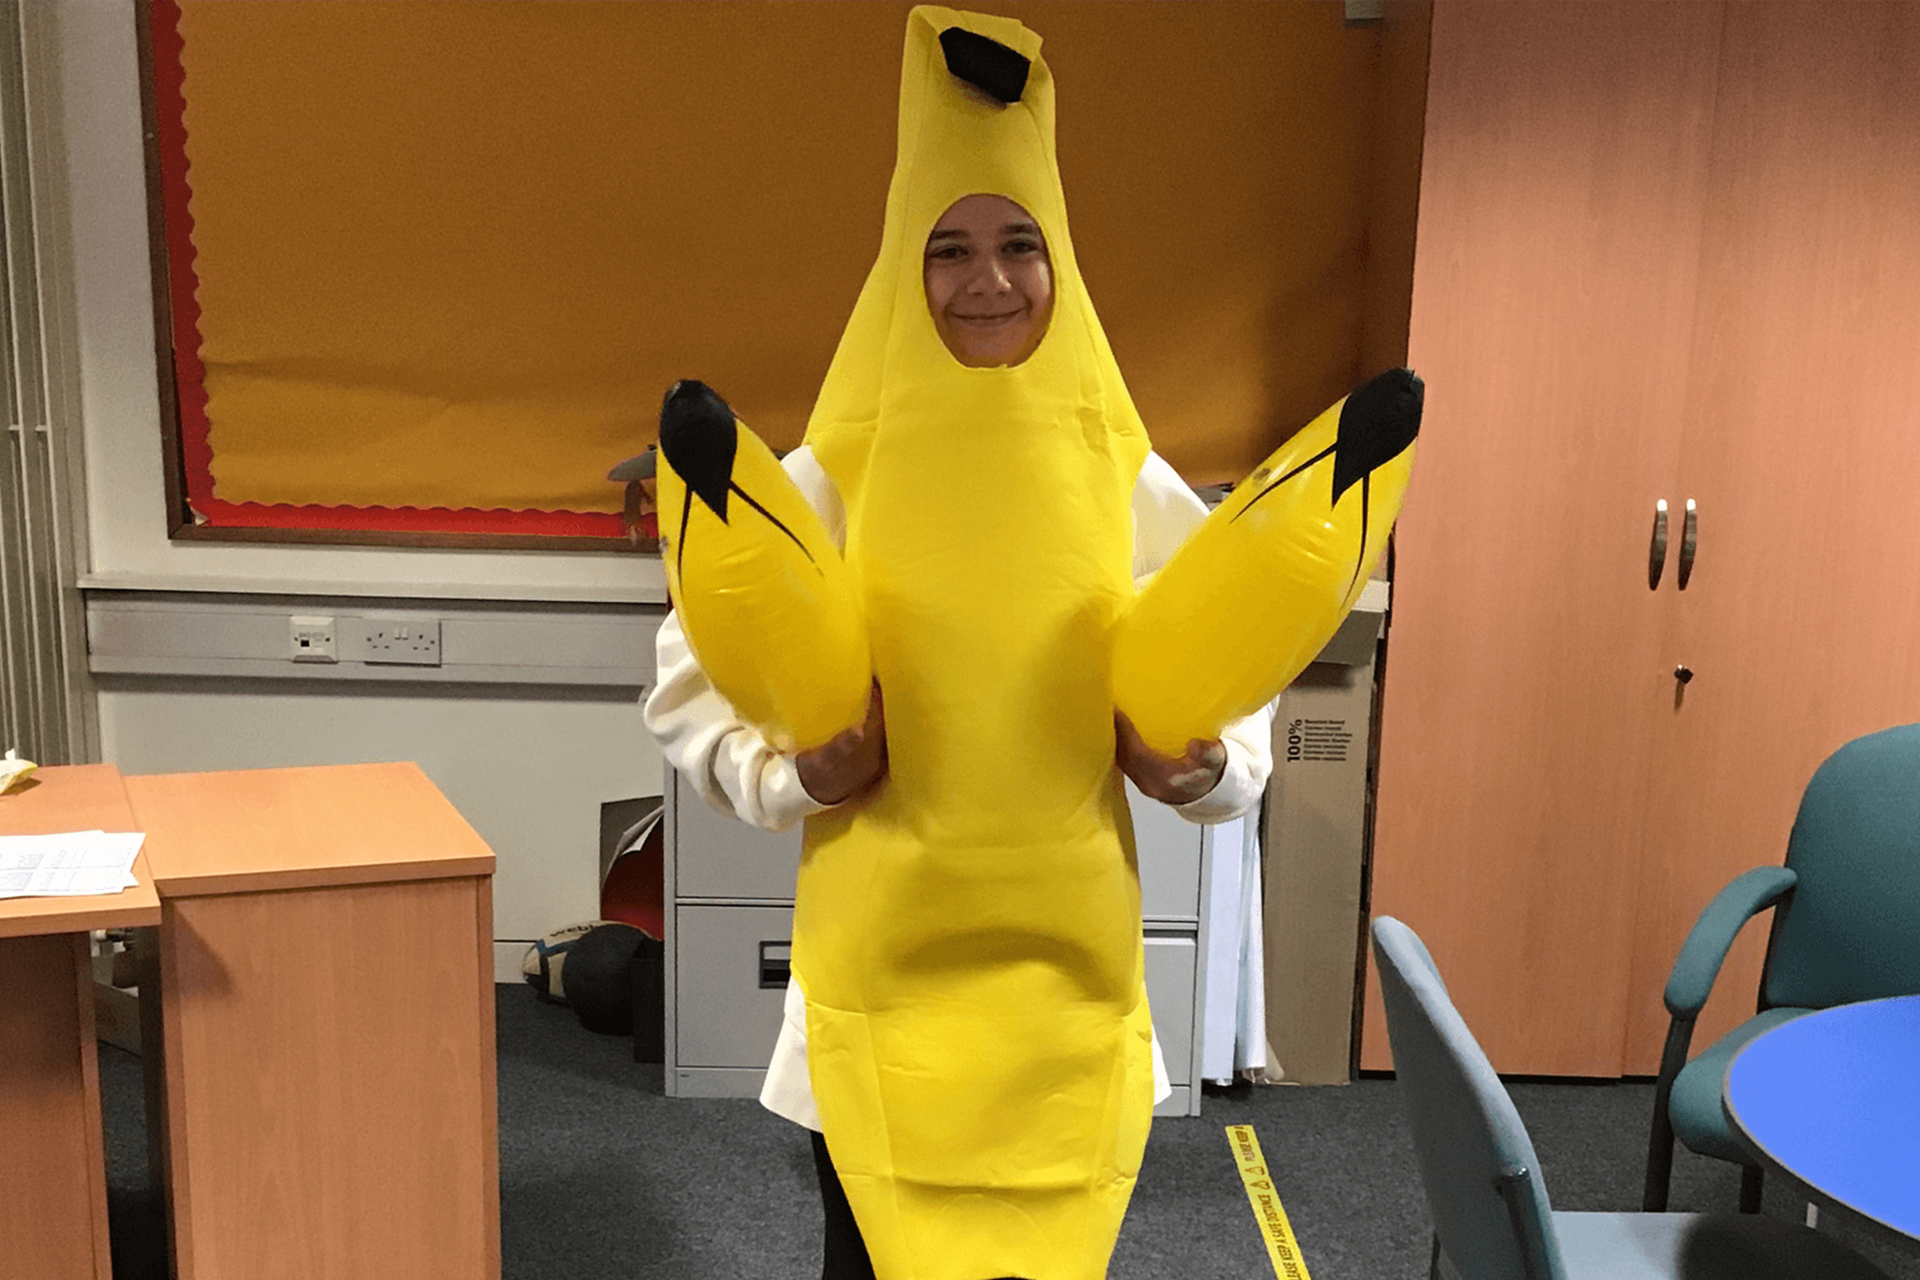 A person stands wearing a banana costume hold two inflatable bananas